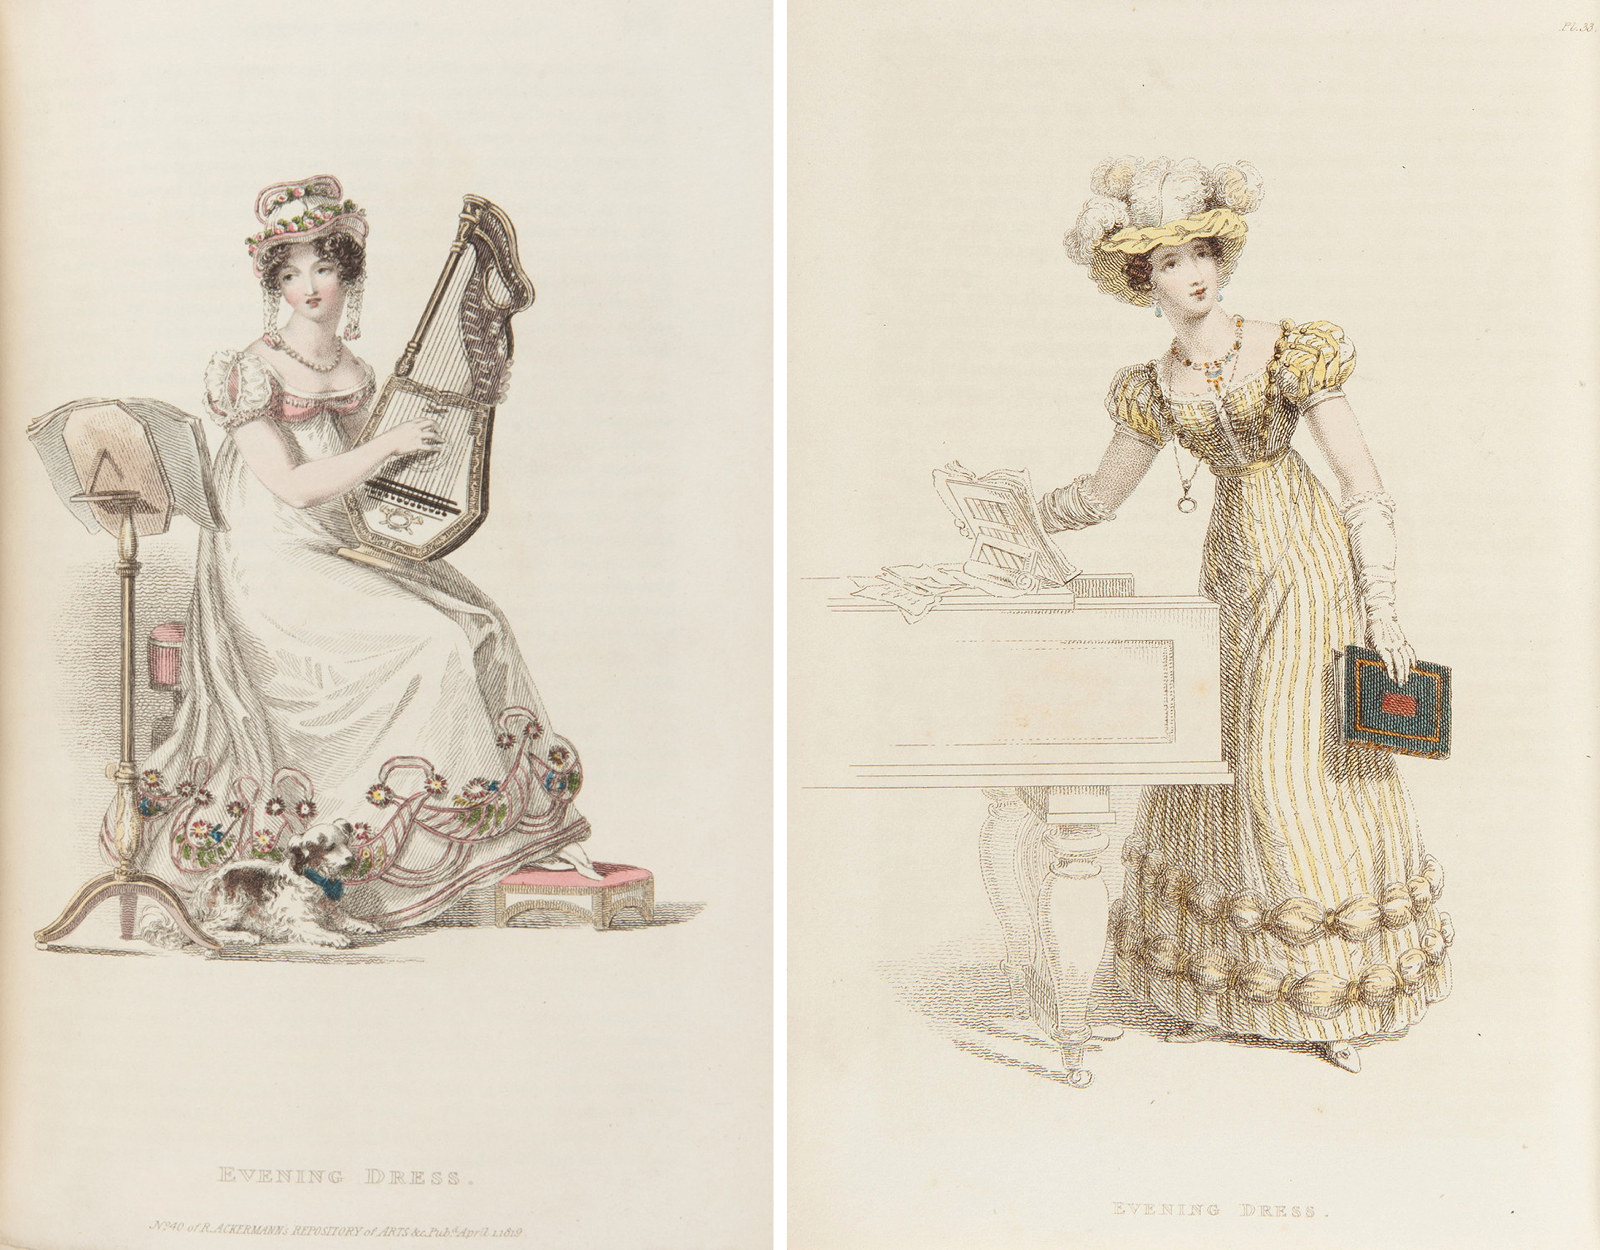 Plate from Rudolph Ackermann's 'The repository of arts, literature, fashions &c', December 1824